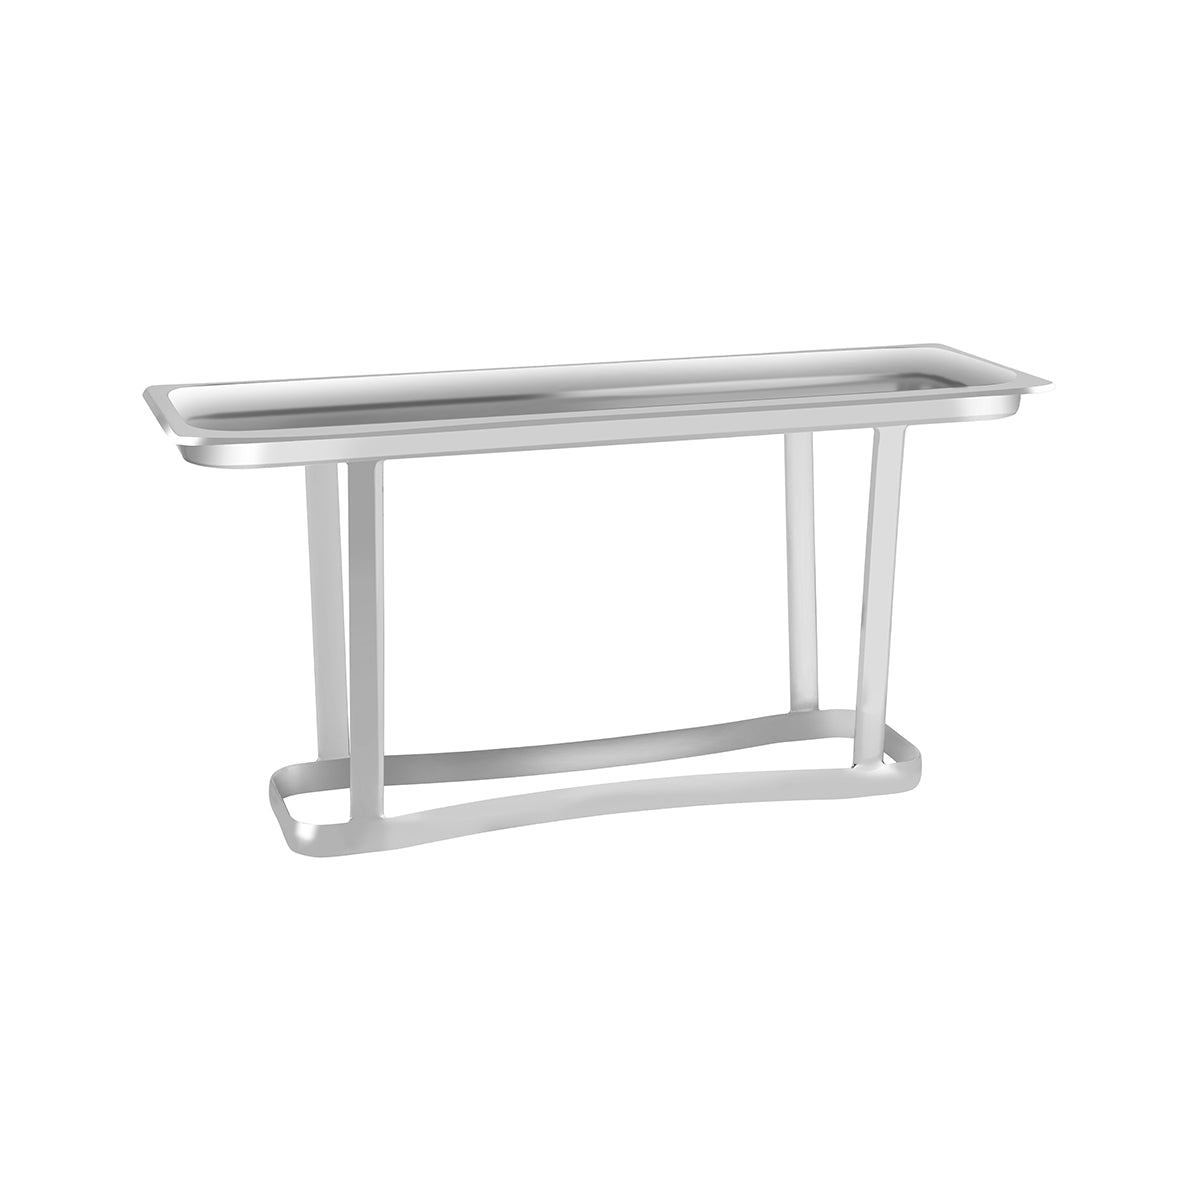 H-788-H26 Hyperlux Stackable Display Stand with Tray 165x260mm Tomkin Australia Hospitality Supplies